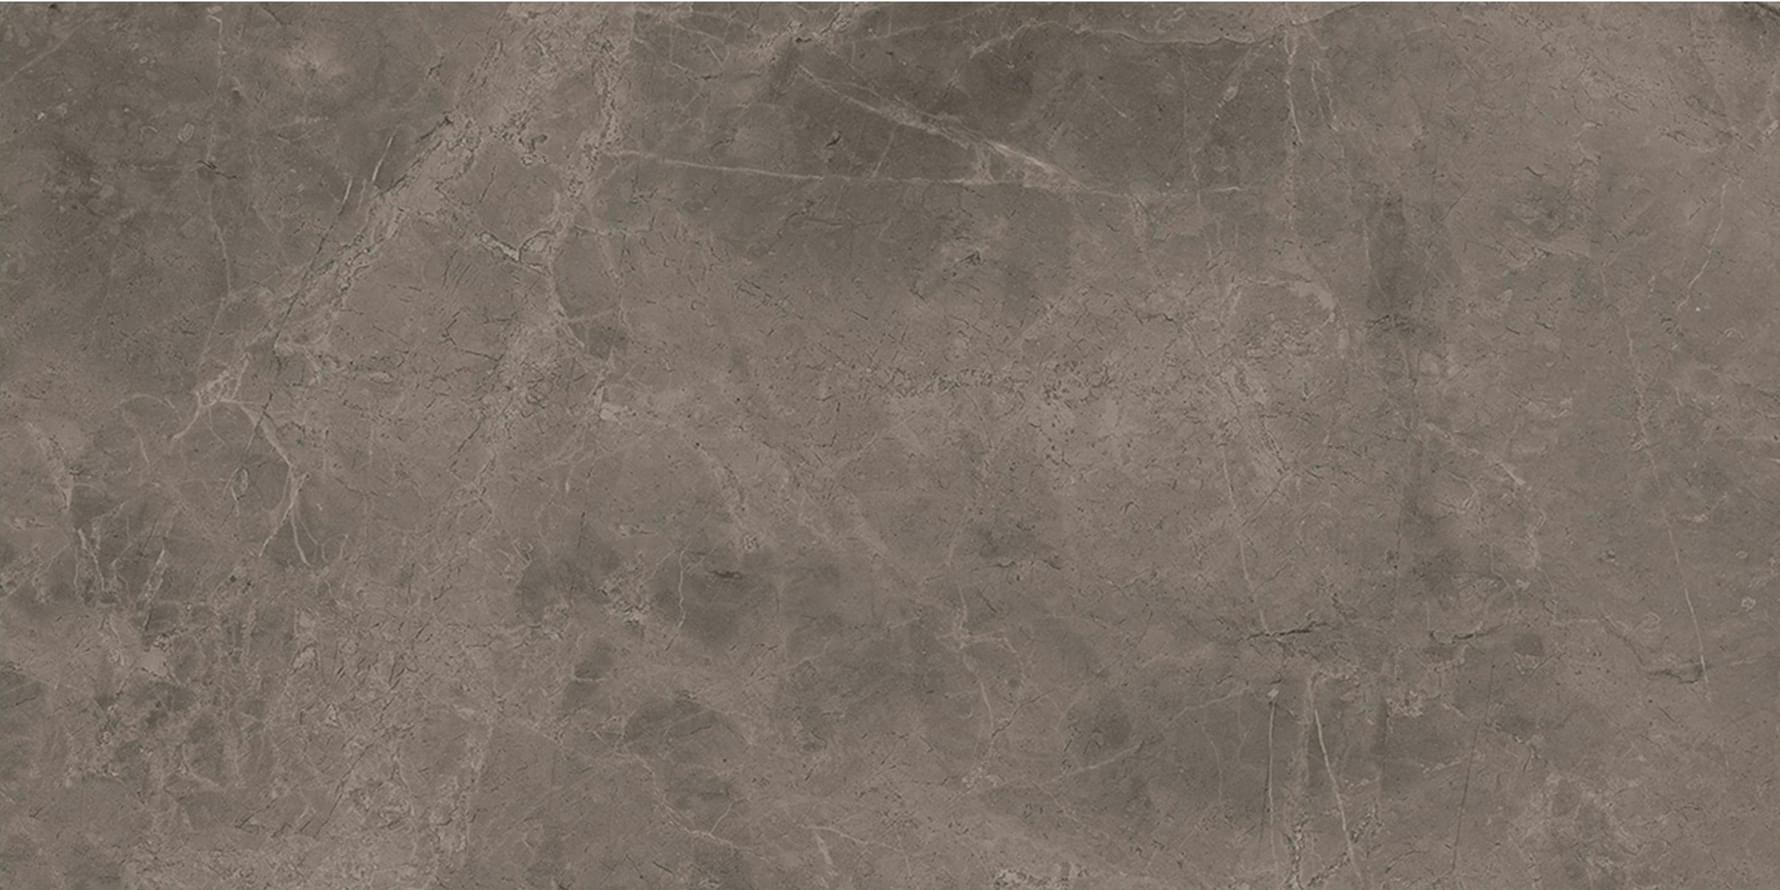 Magica Marstood Marble 03 Fior Di Bosco Polished Rectified 60x120